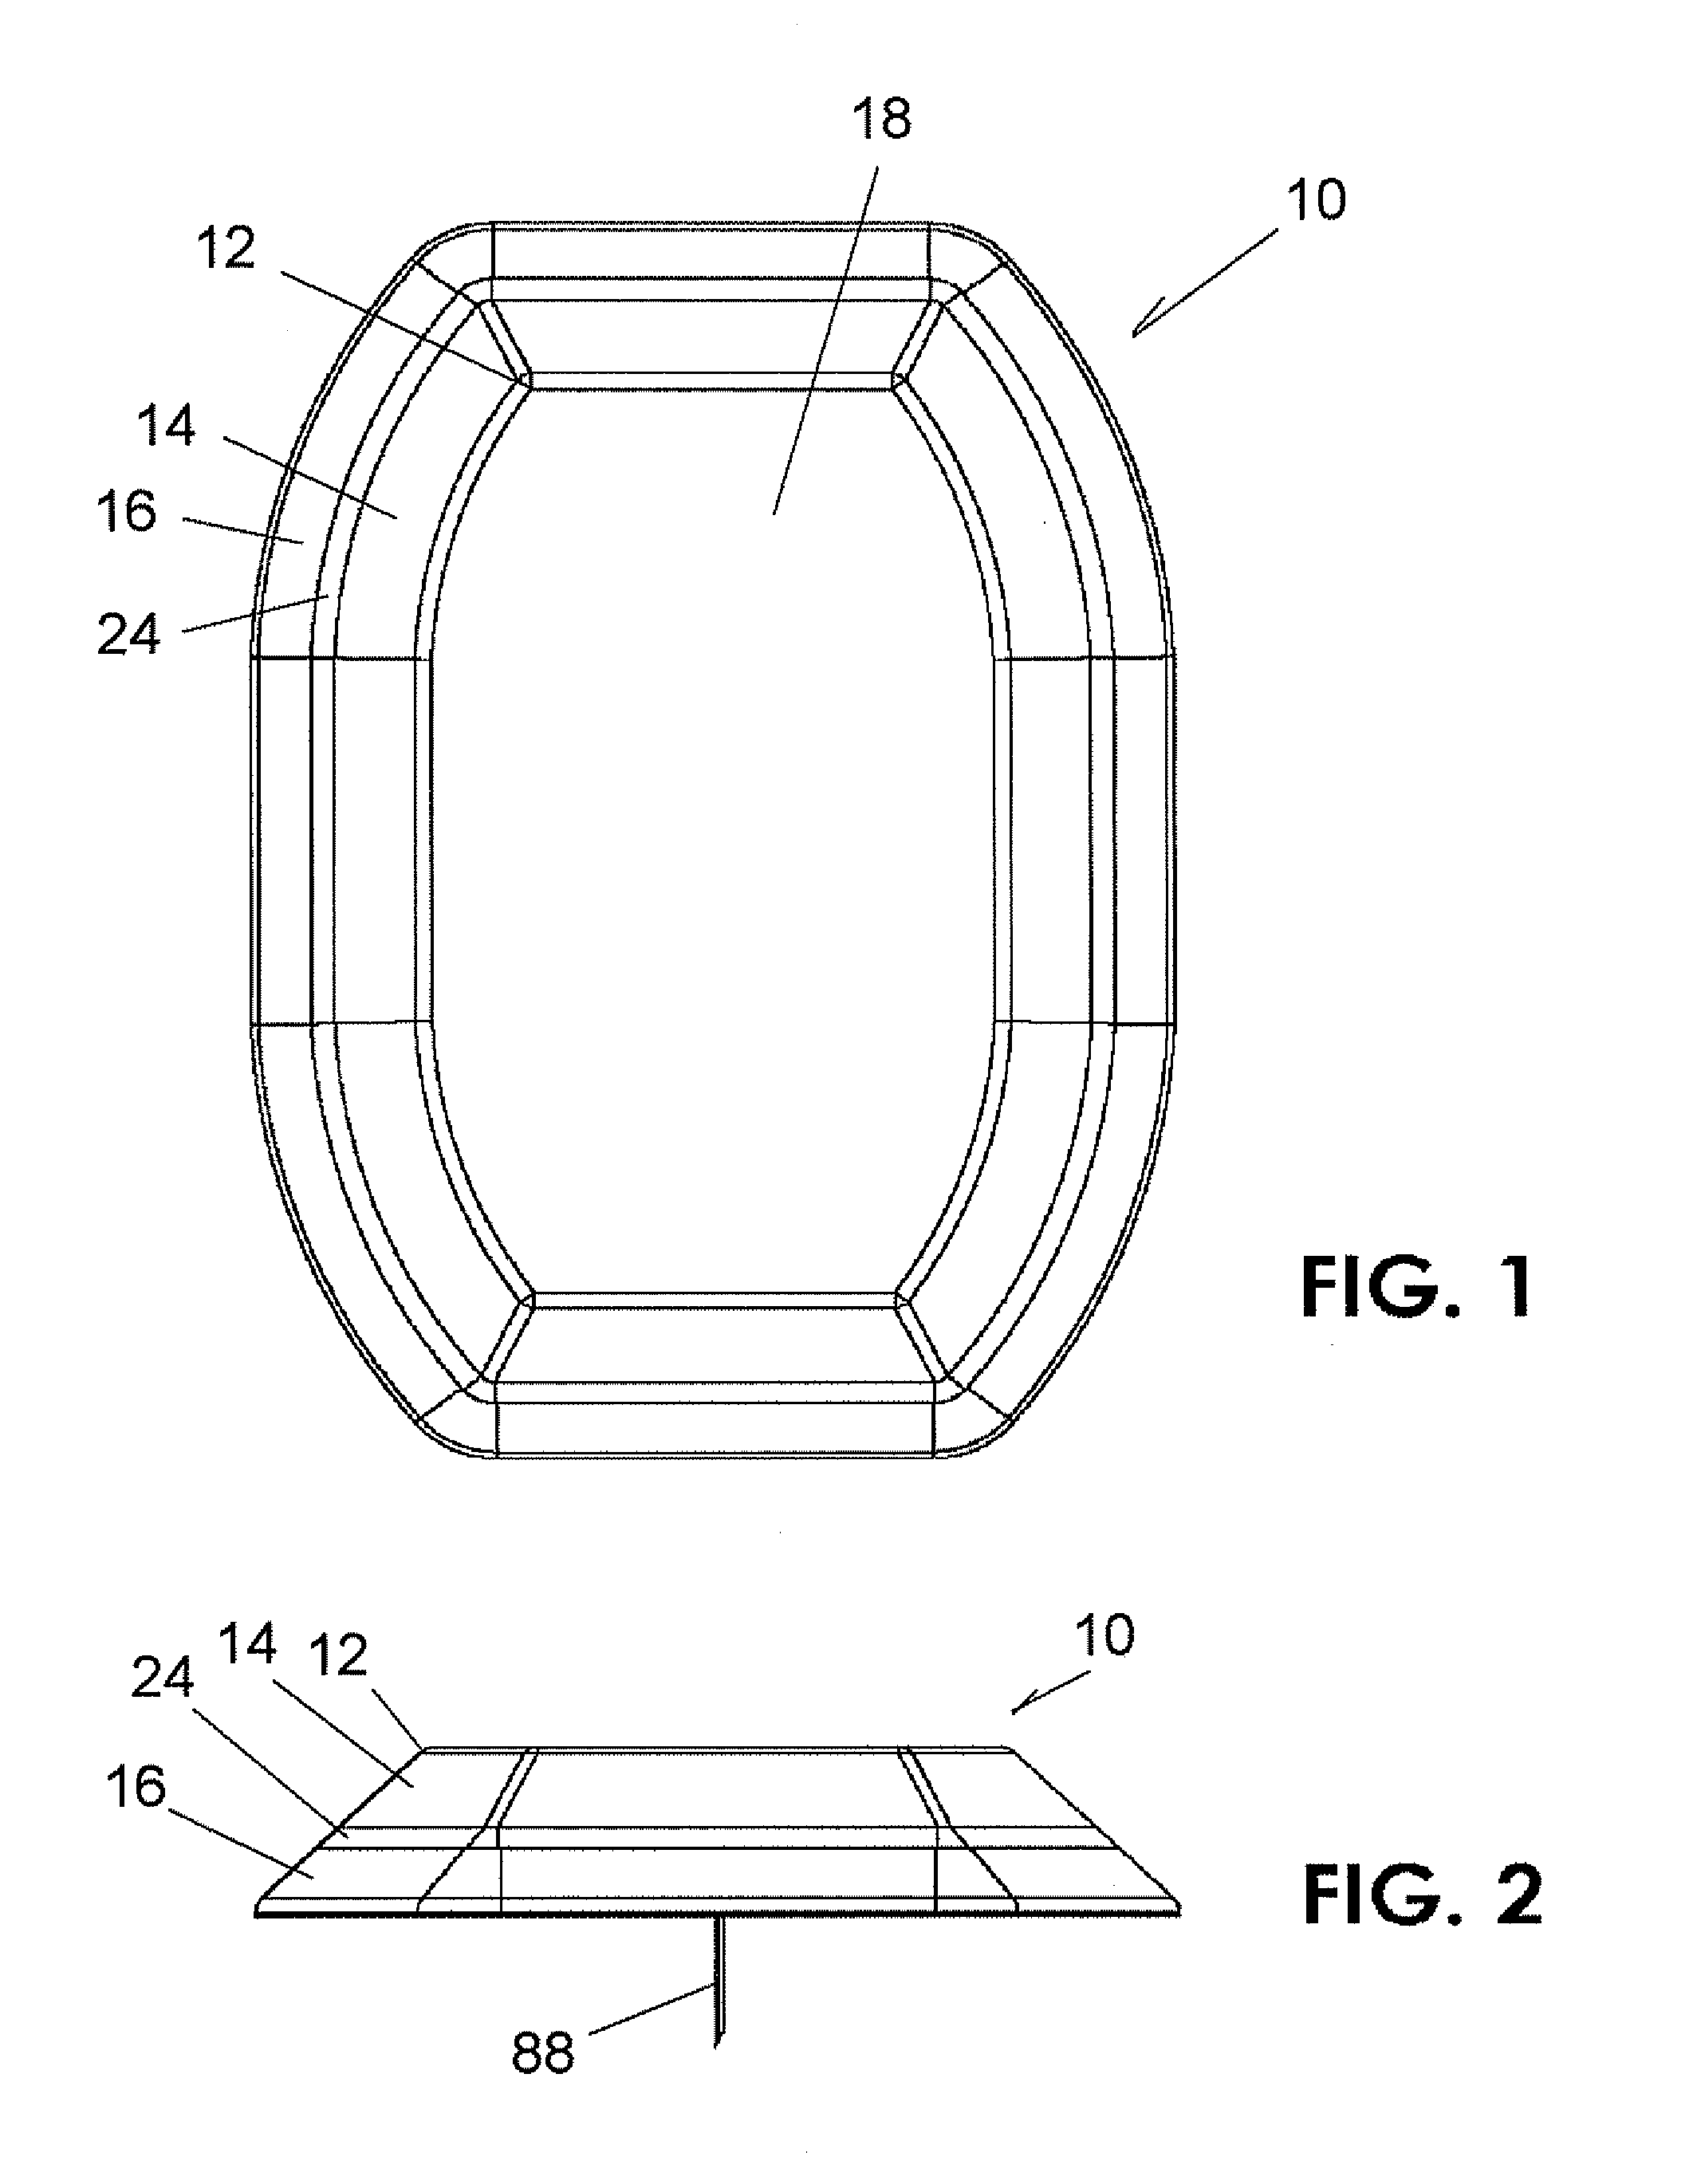 Apparatus for infusing liquid to a body